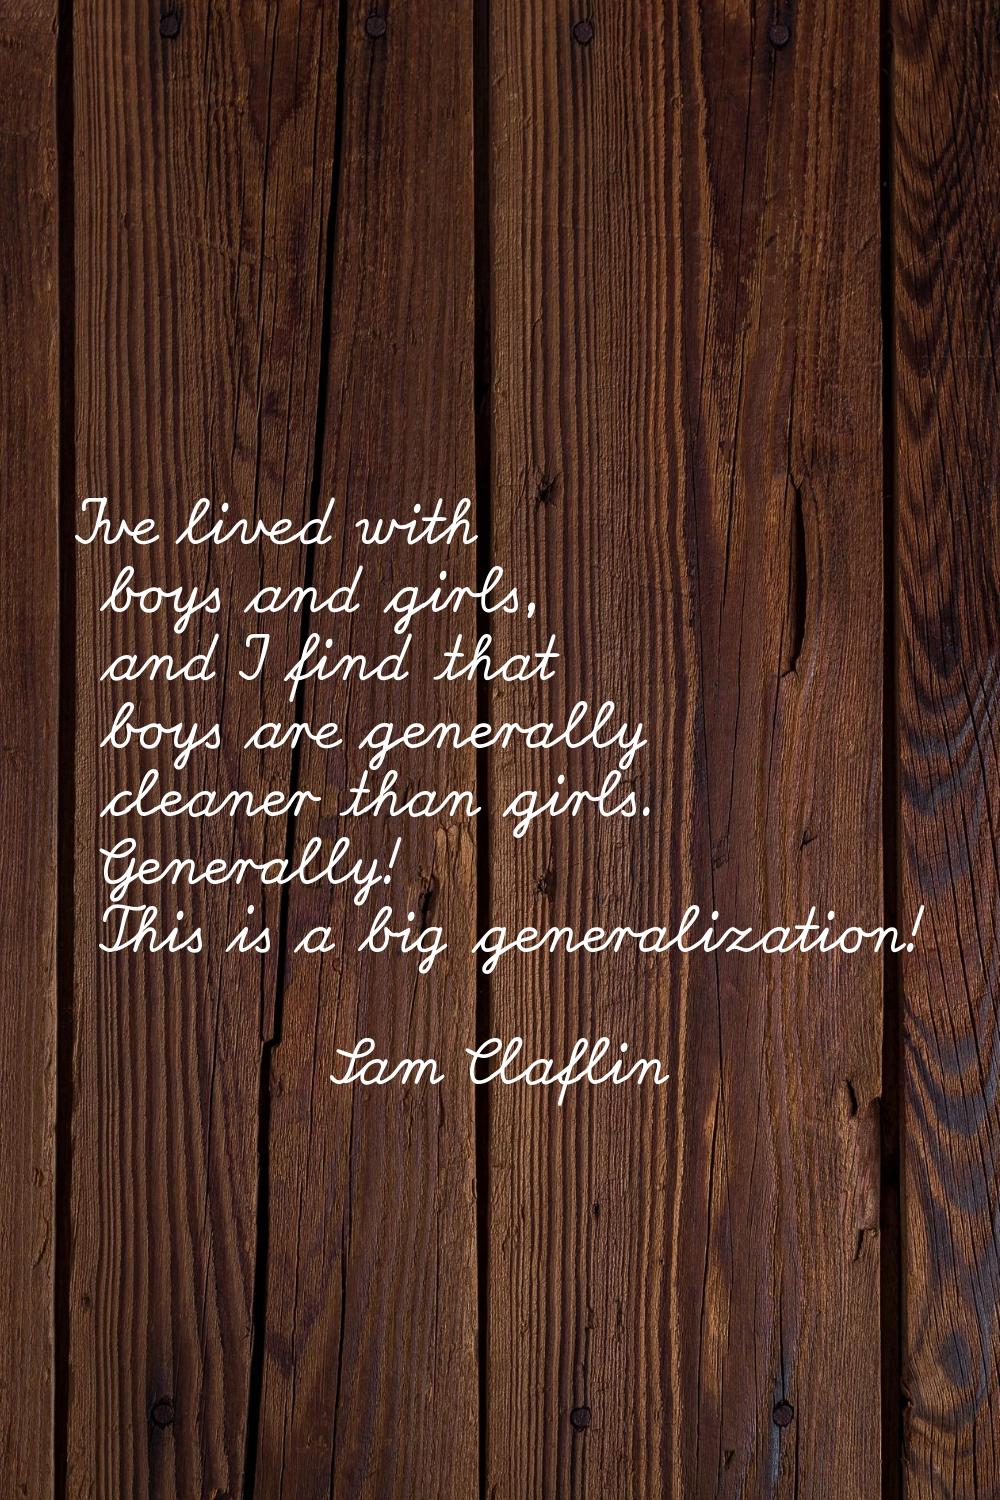 I've lived with boys and girls, and I find that boys are generally cleaner than girls. Generally! T